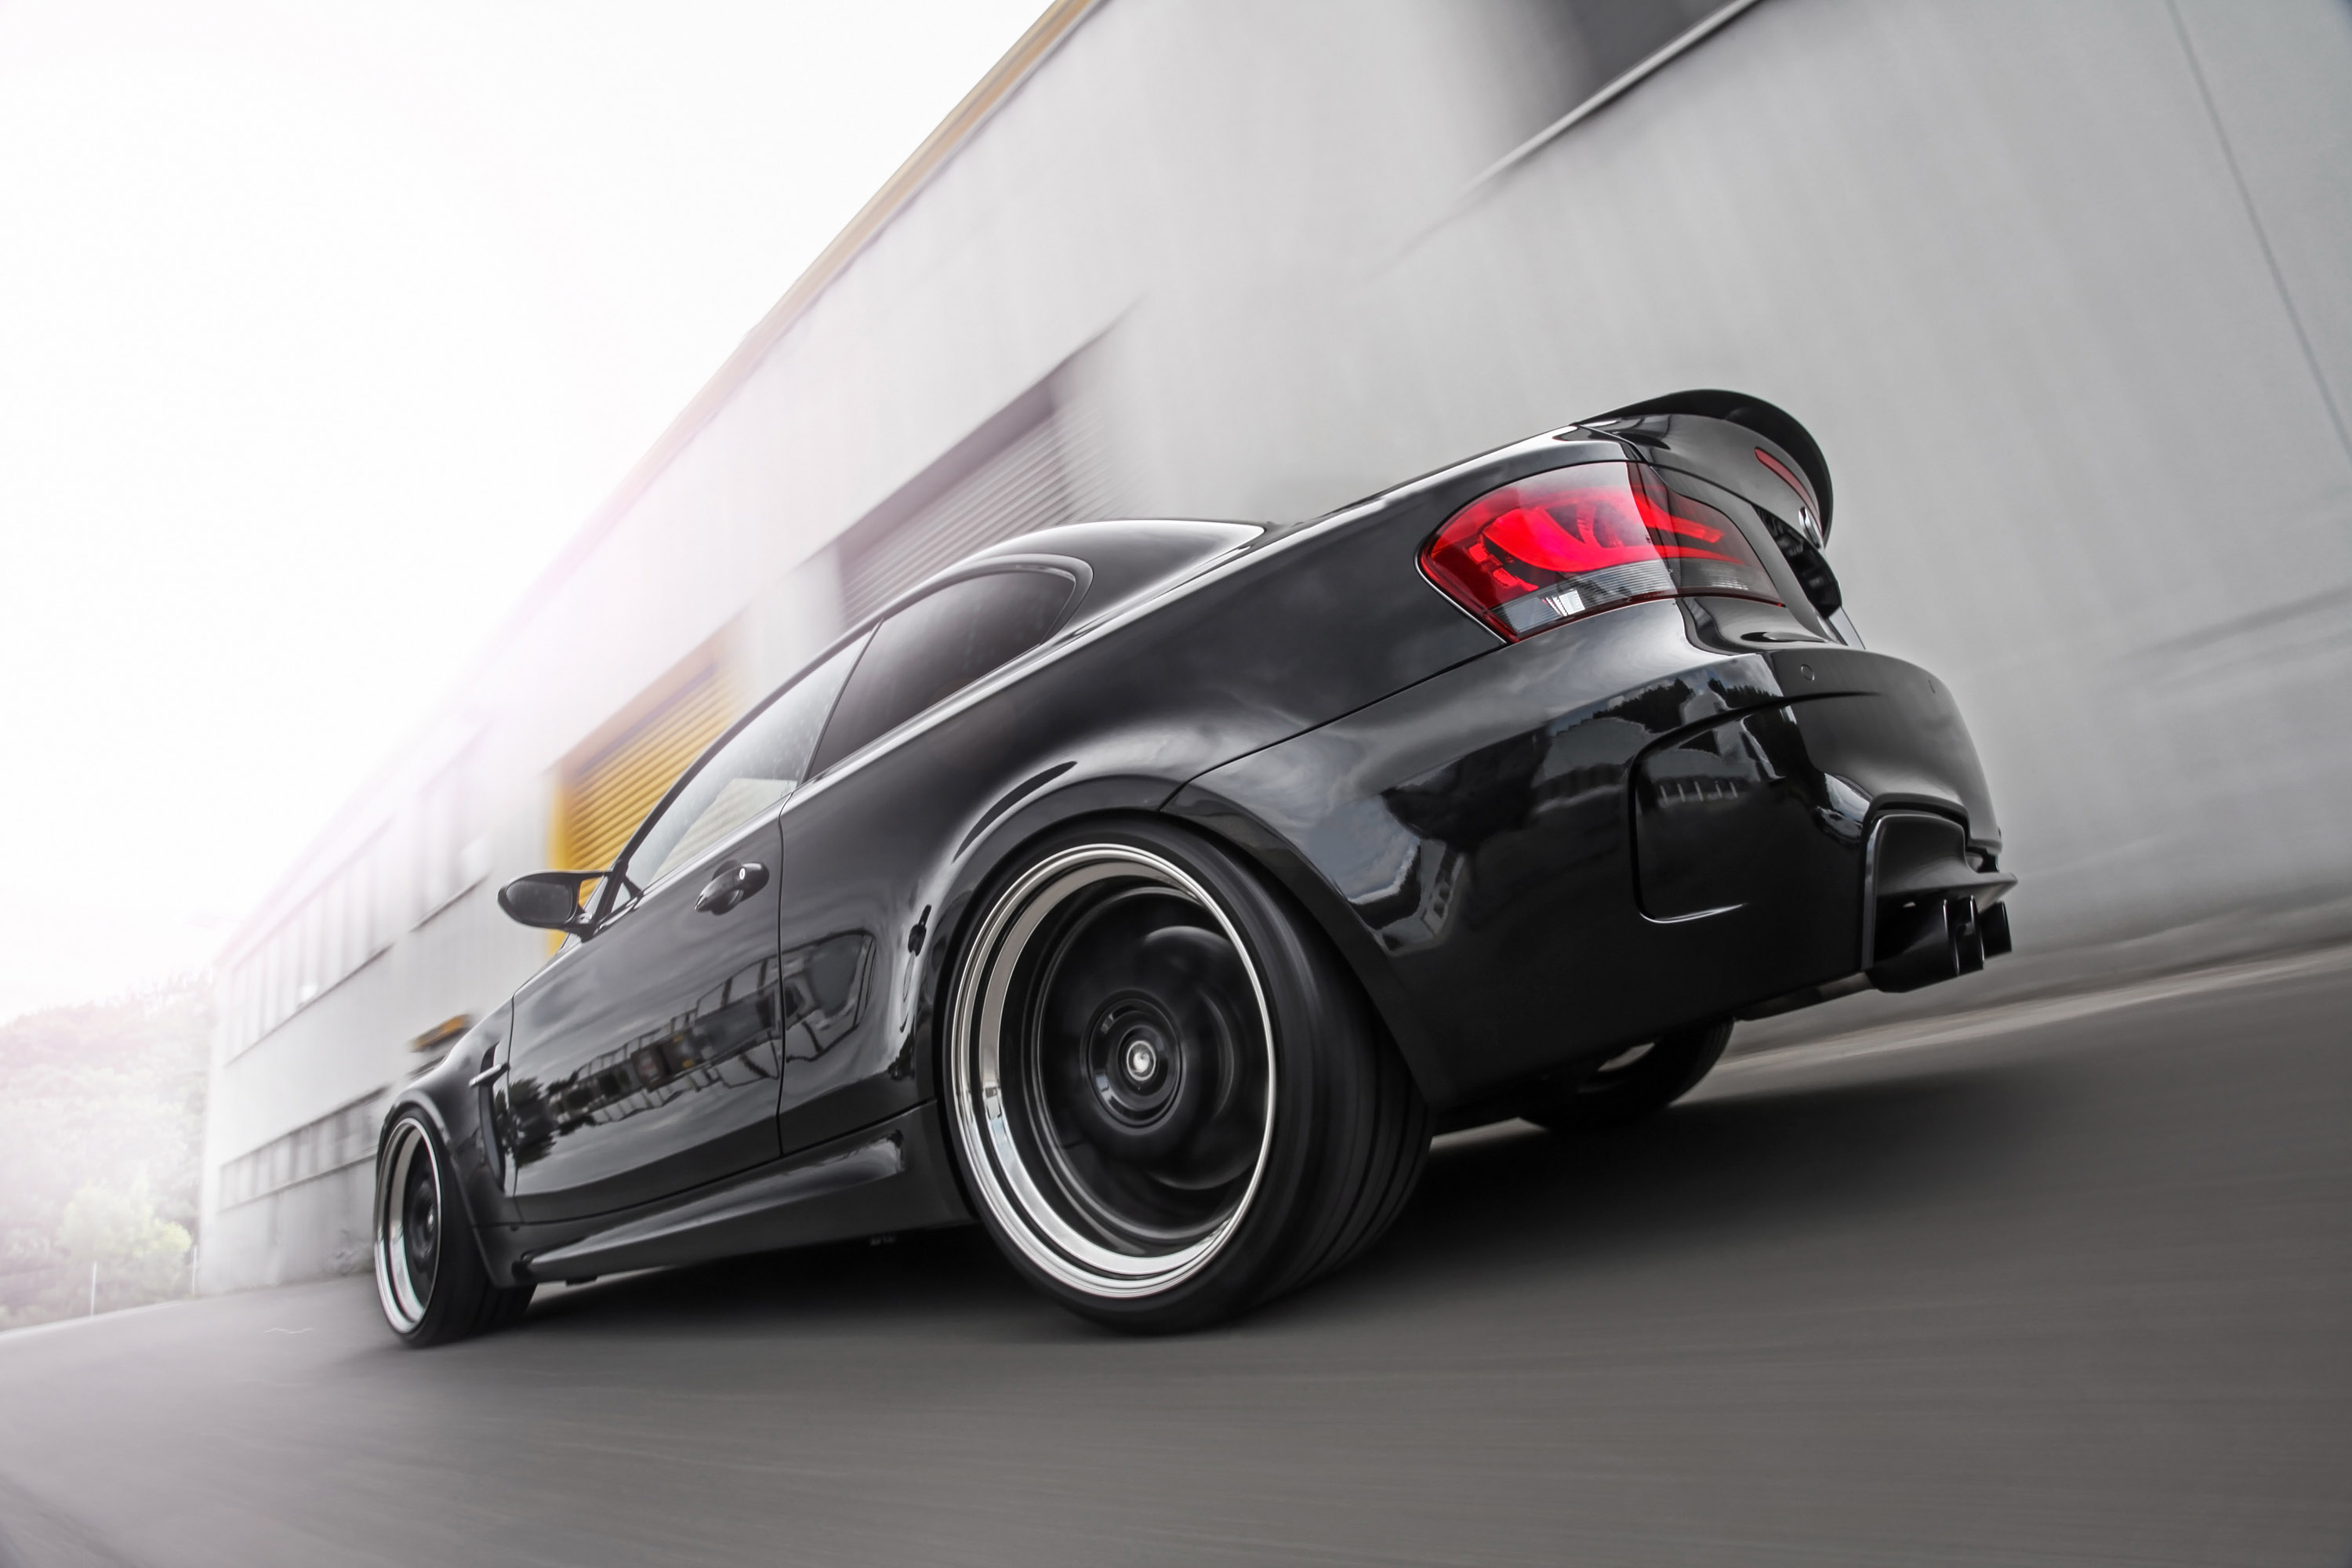 OK-Chiptuning BMW 1-Series M Coupe